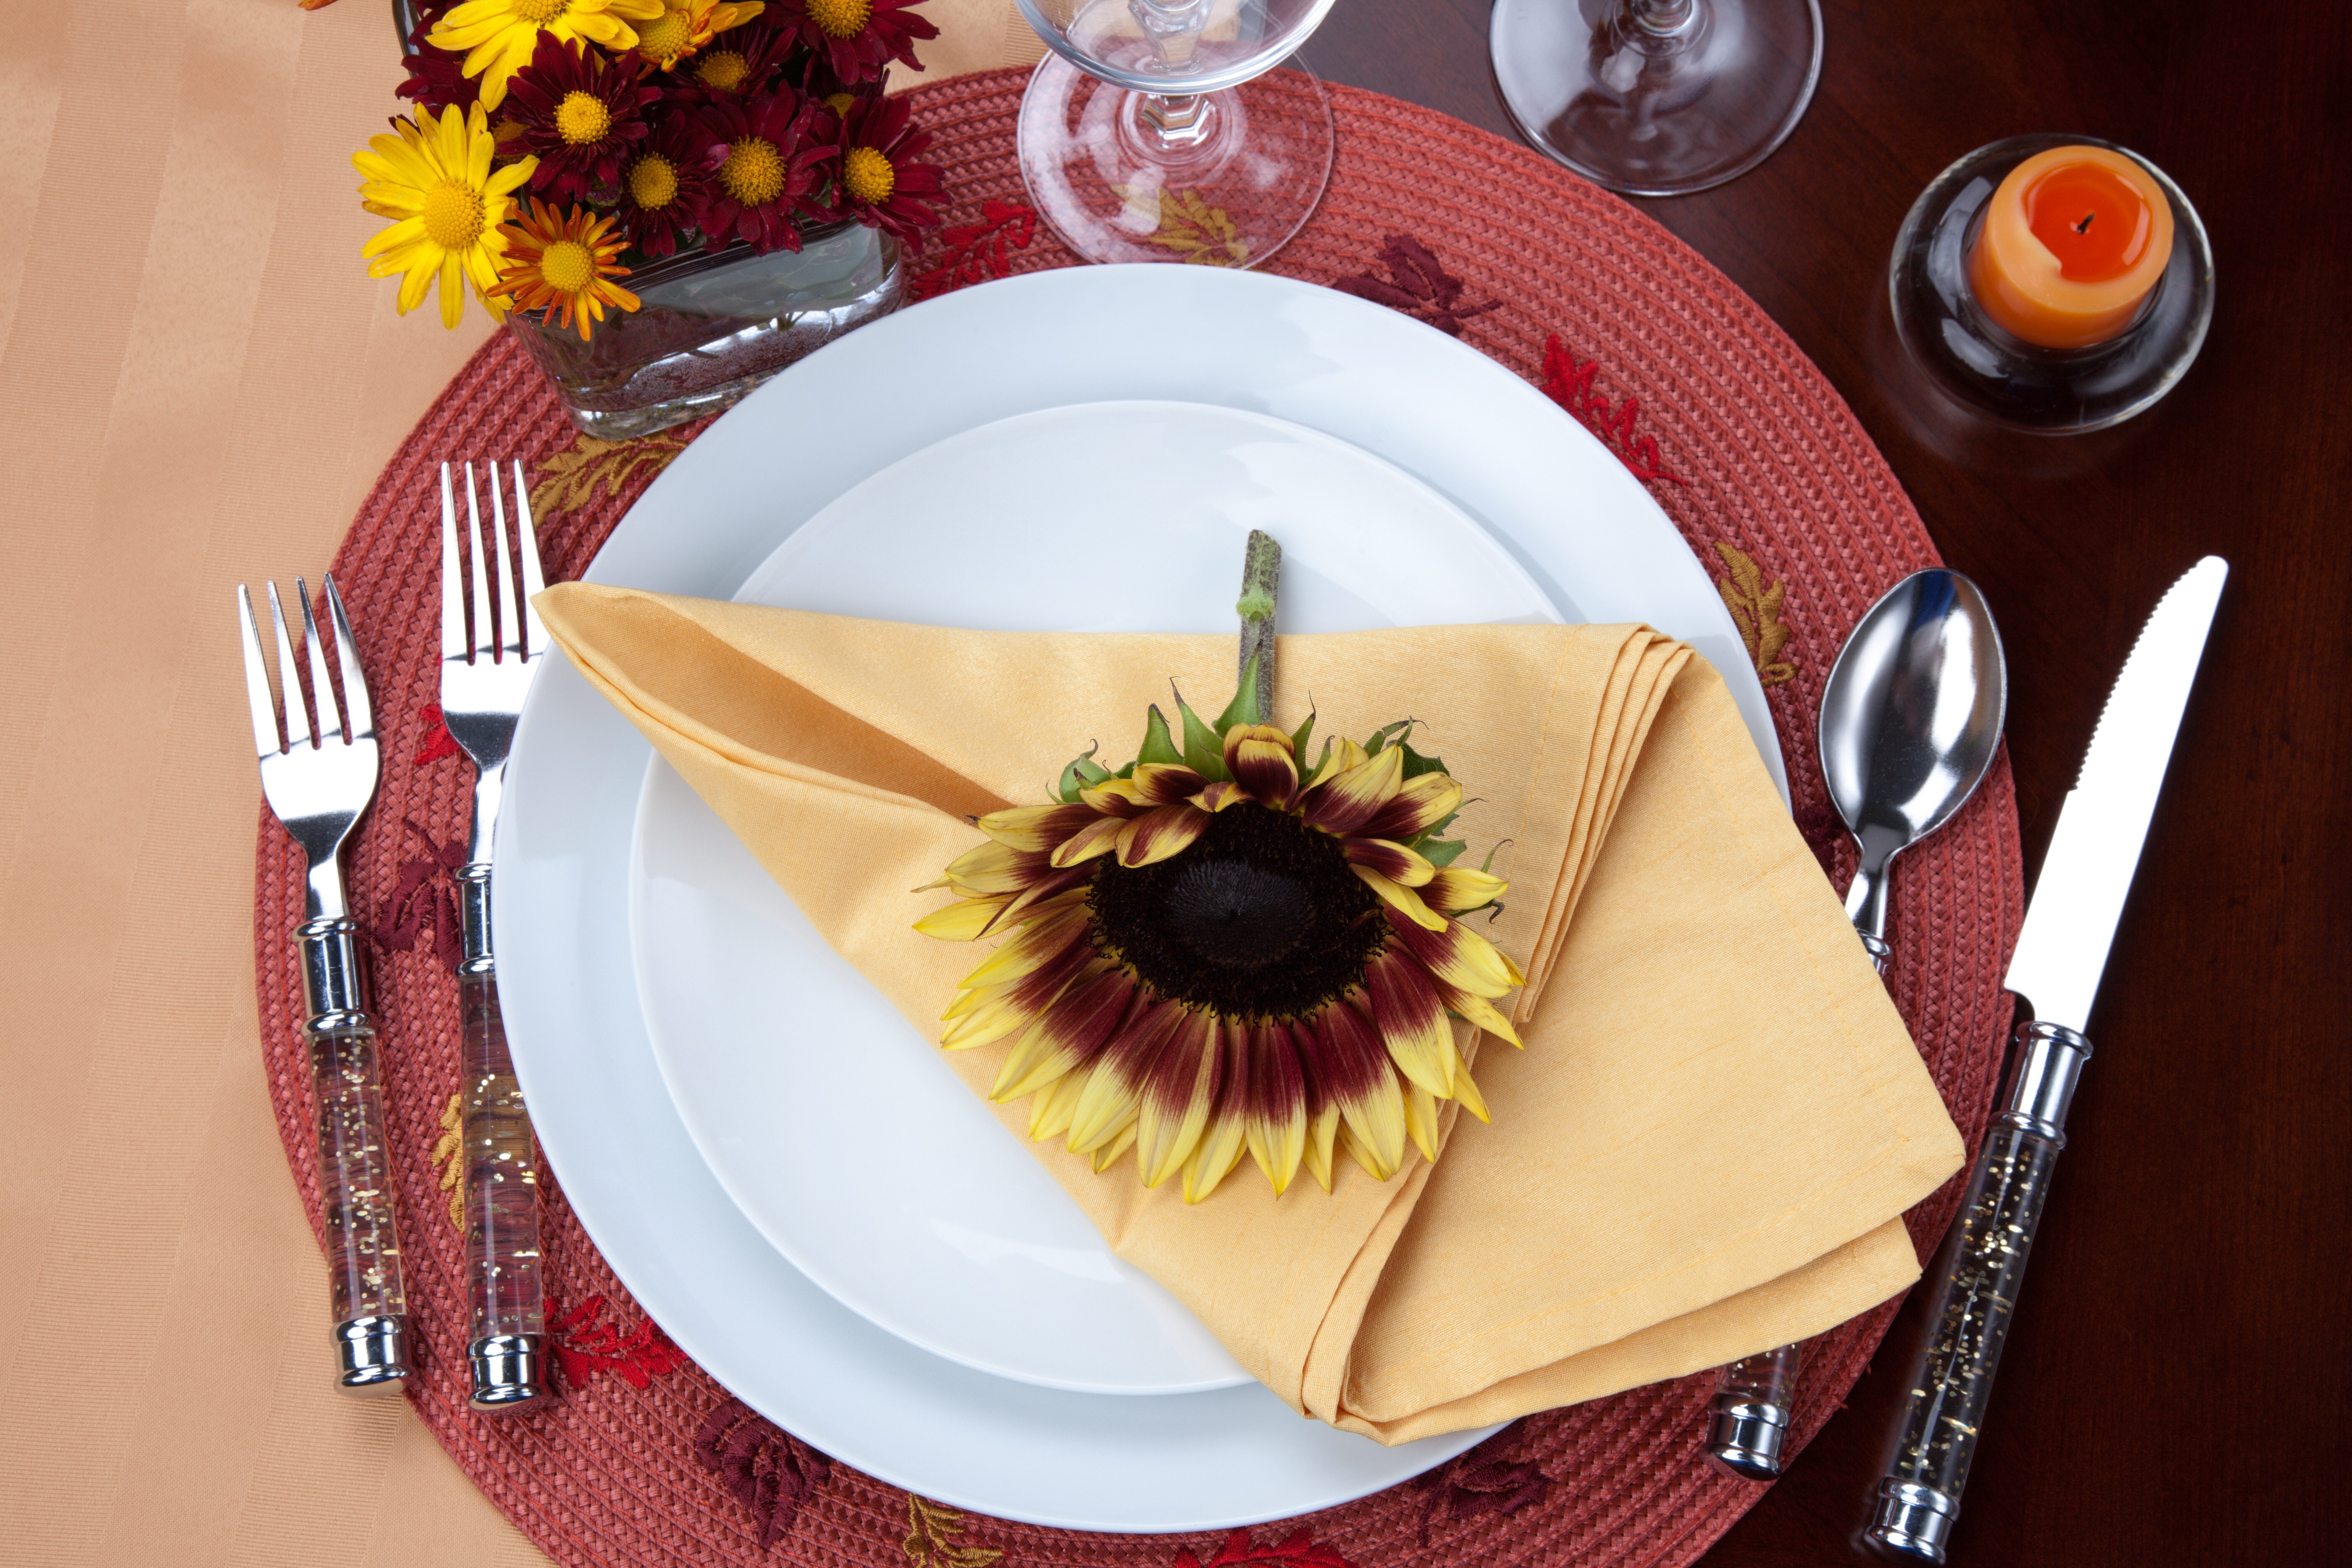 Table Decoration Fall Flowers Sunflowers Dishes Napkin